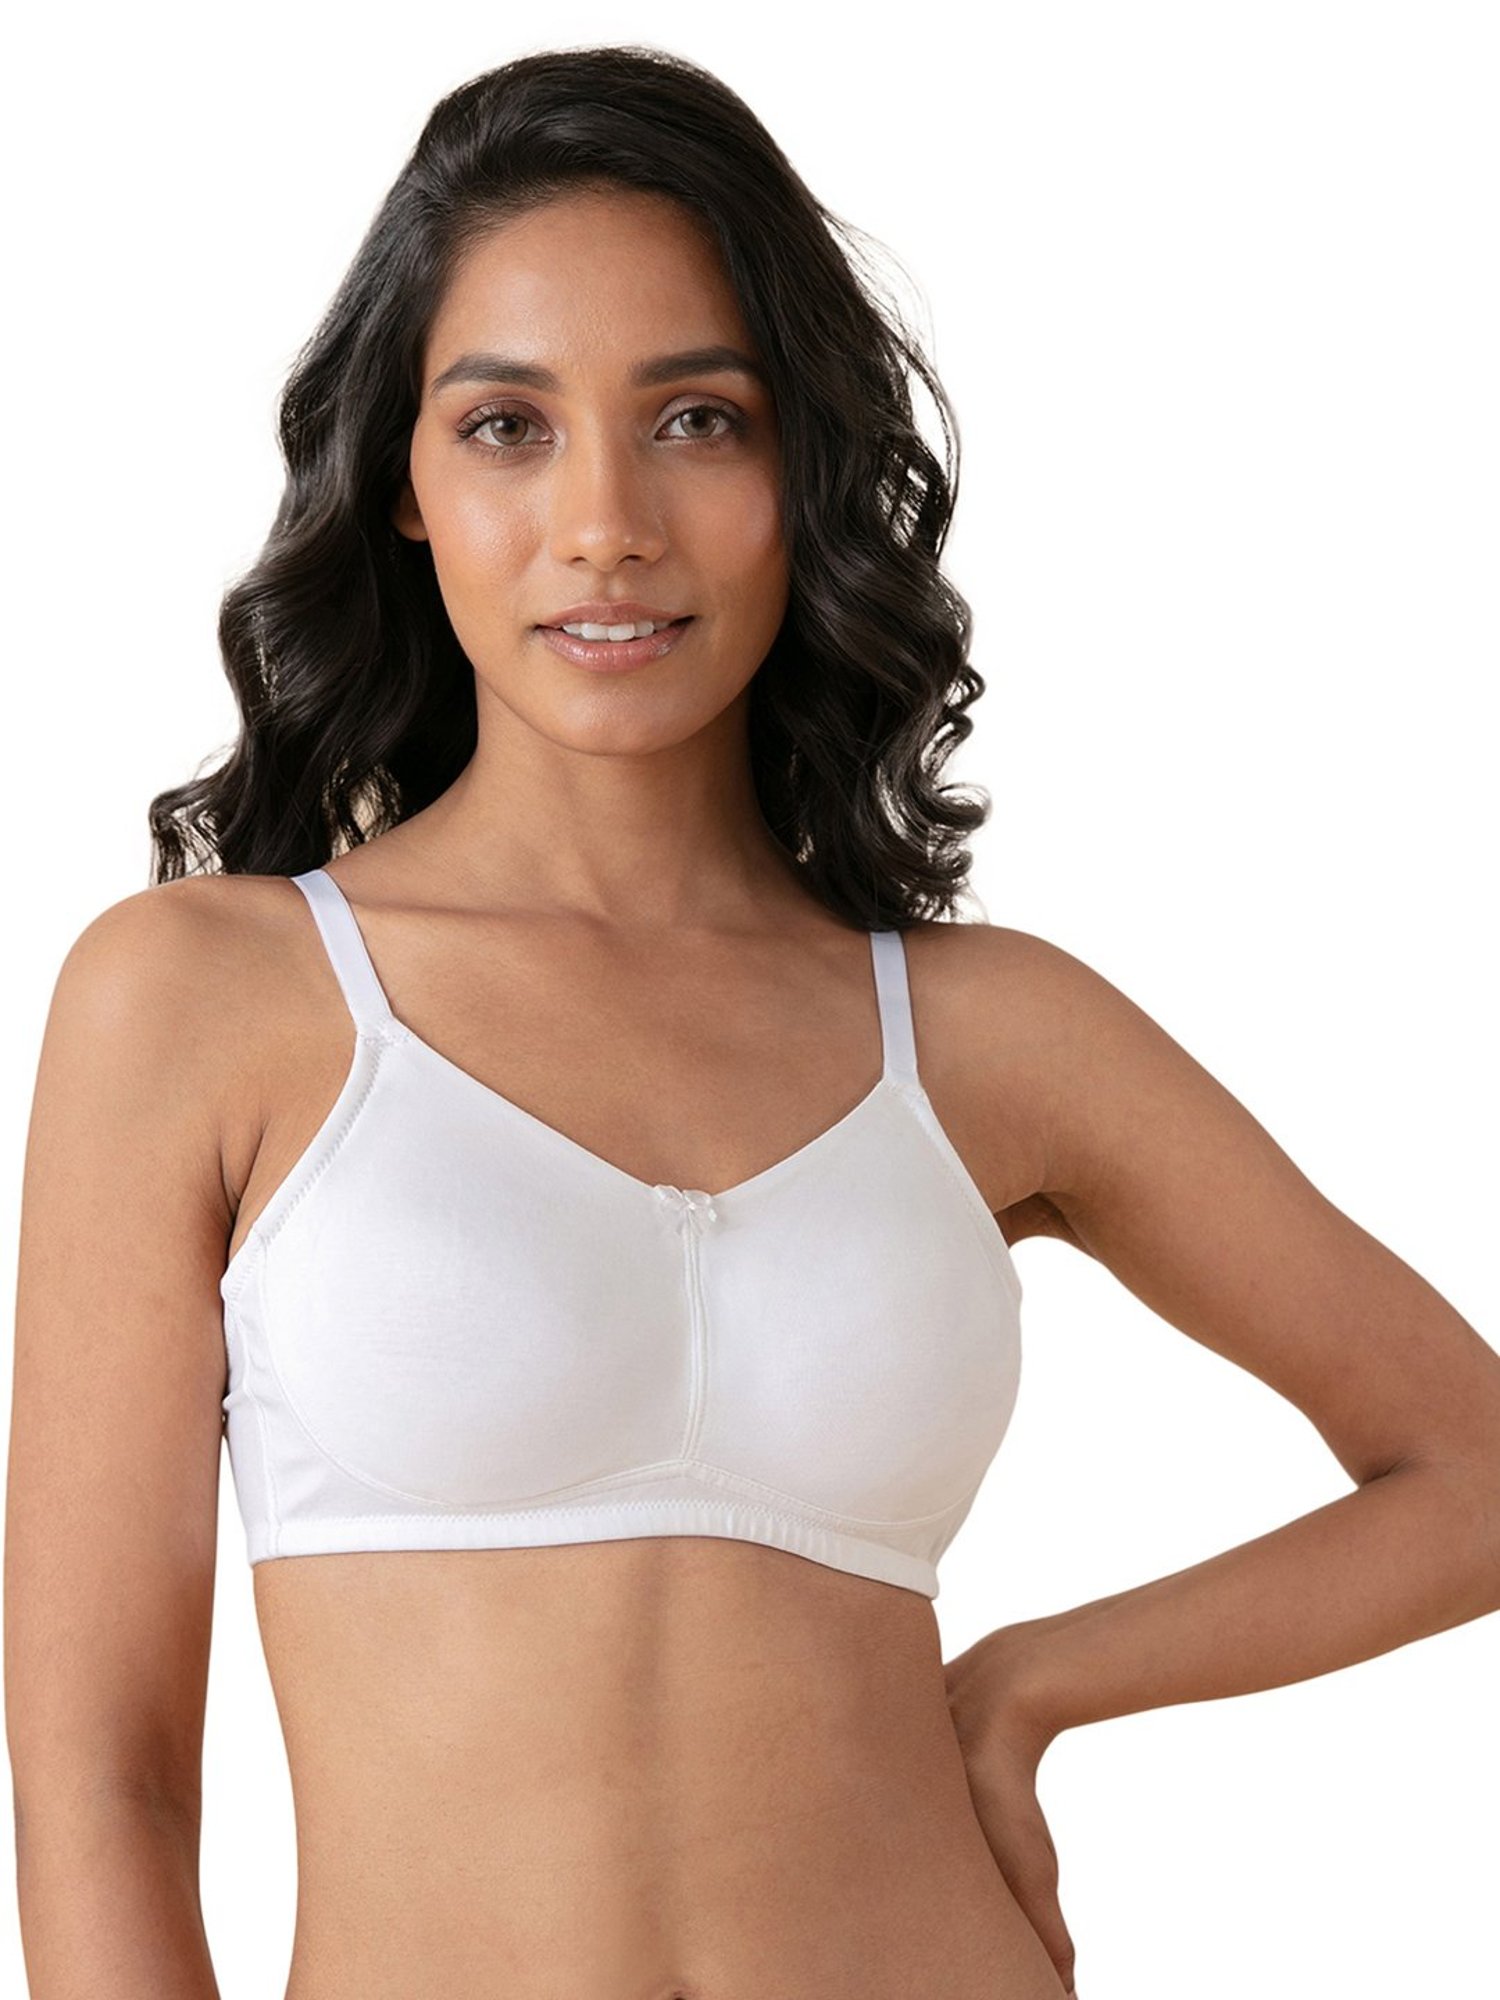 Nykd Cotton Soft Cup Hold Me Up T-Shirt Bra - Wireless, Full Coverage -  Black